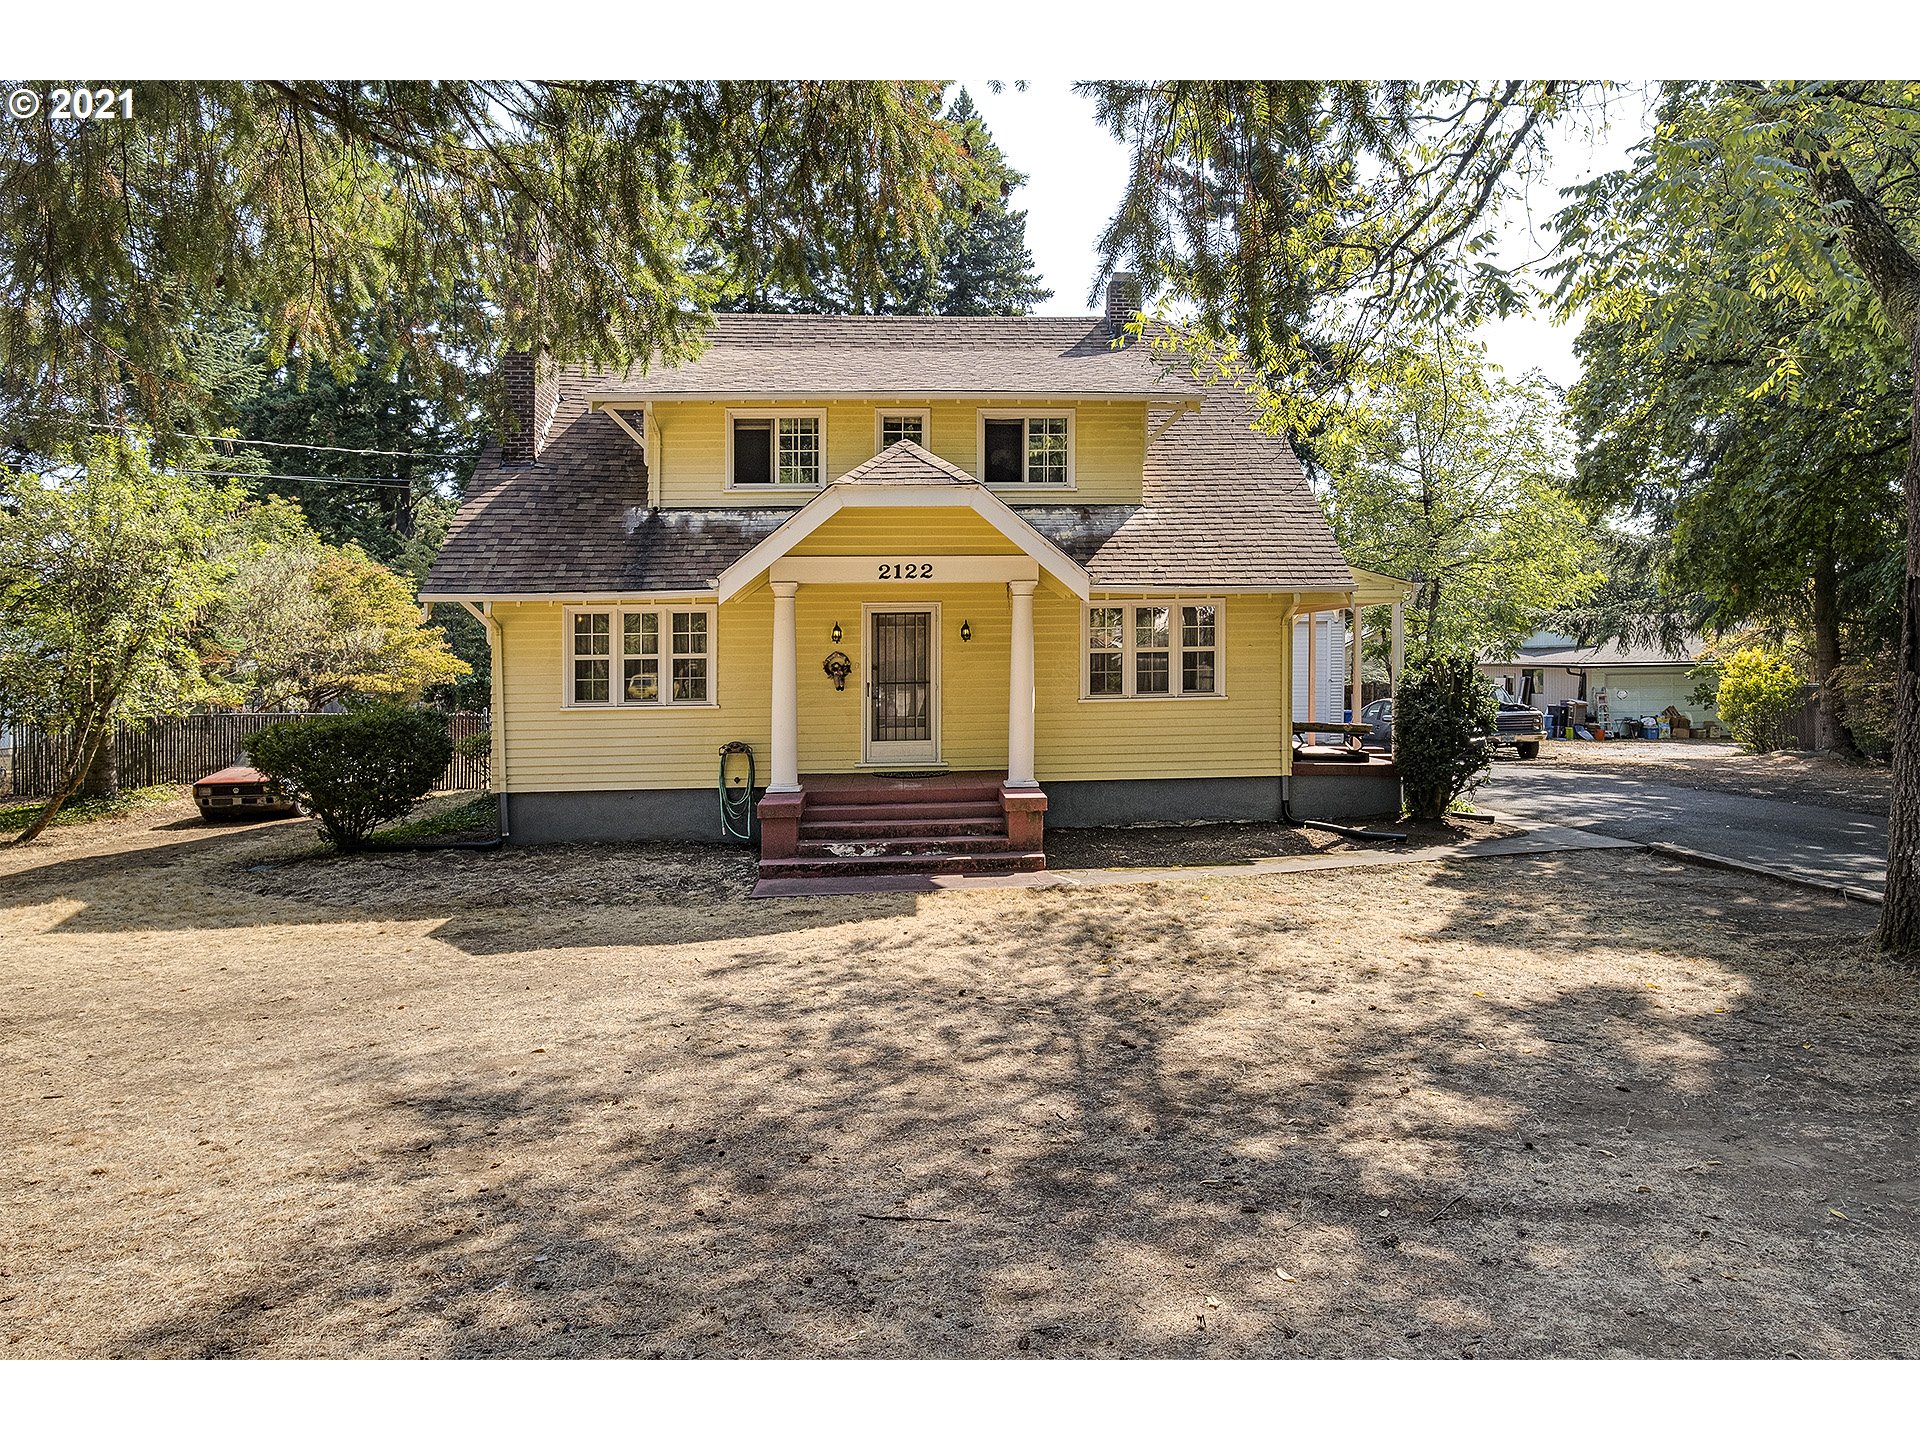 2122 SE 135TH AVE (1 of 32)